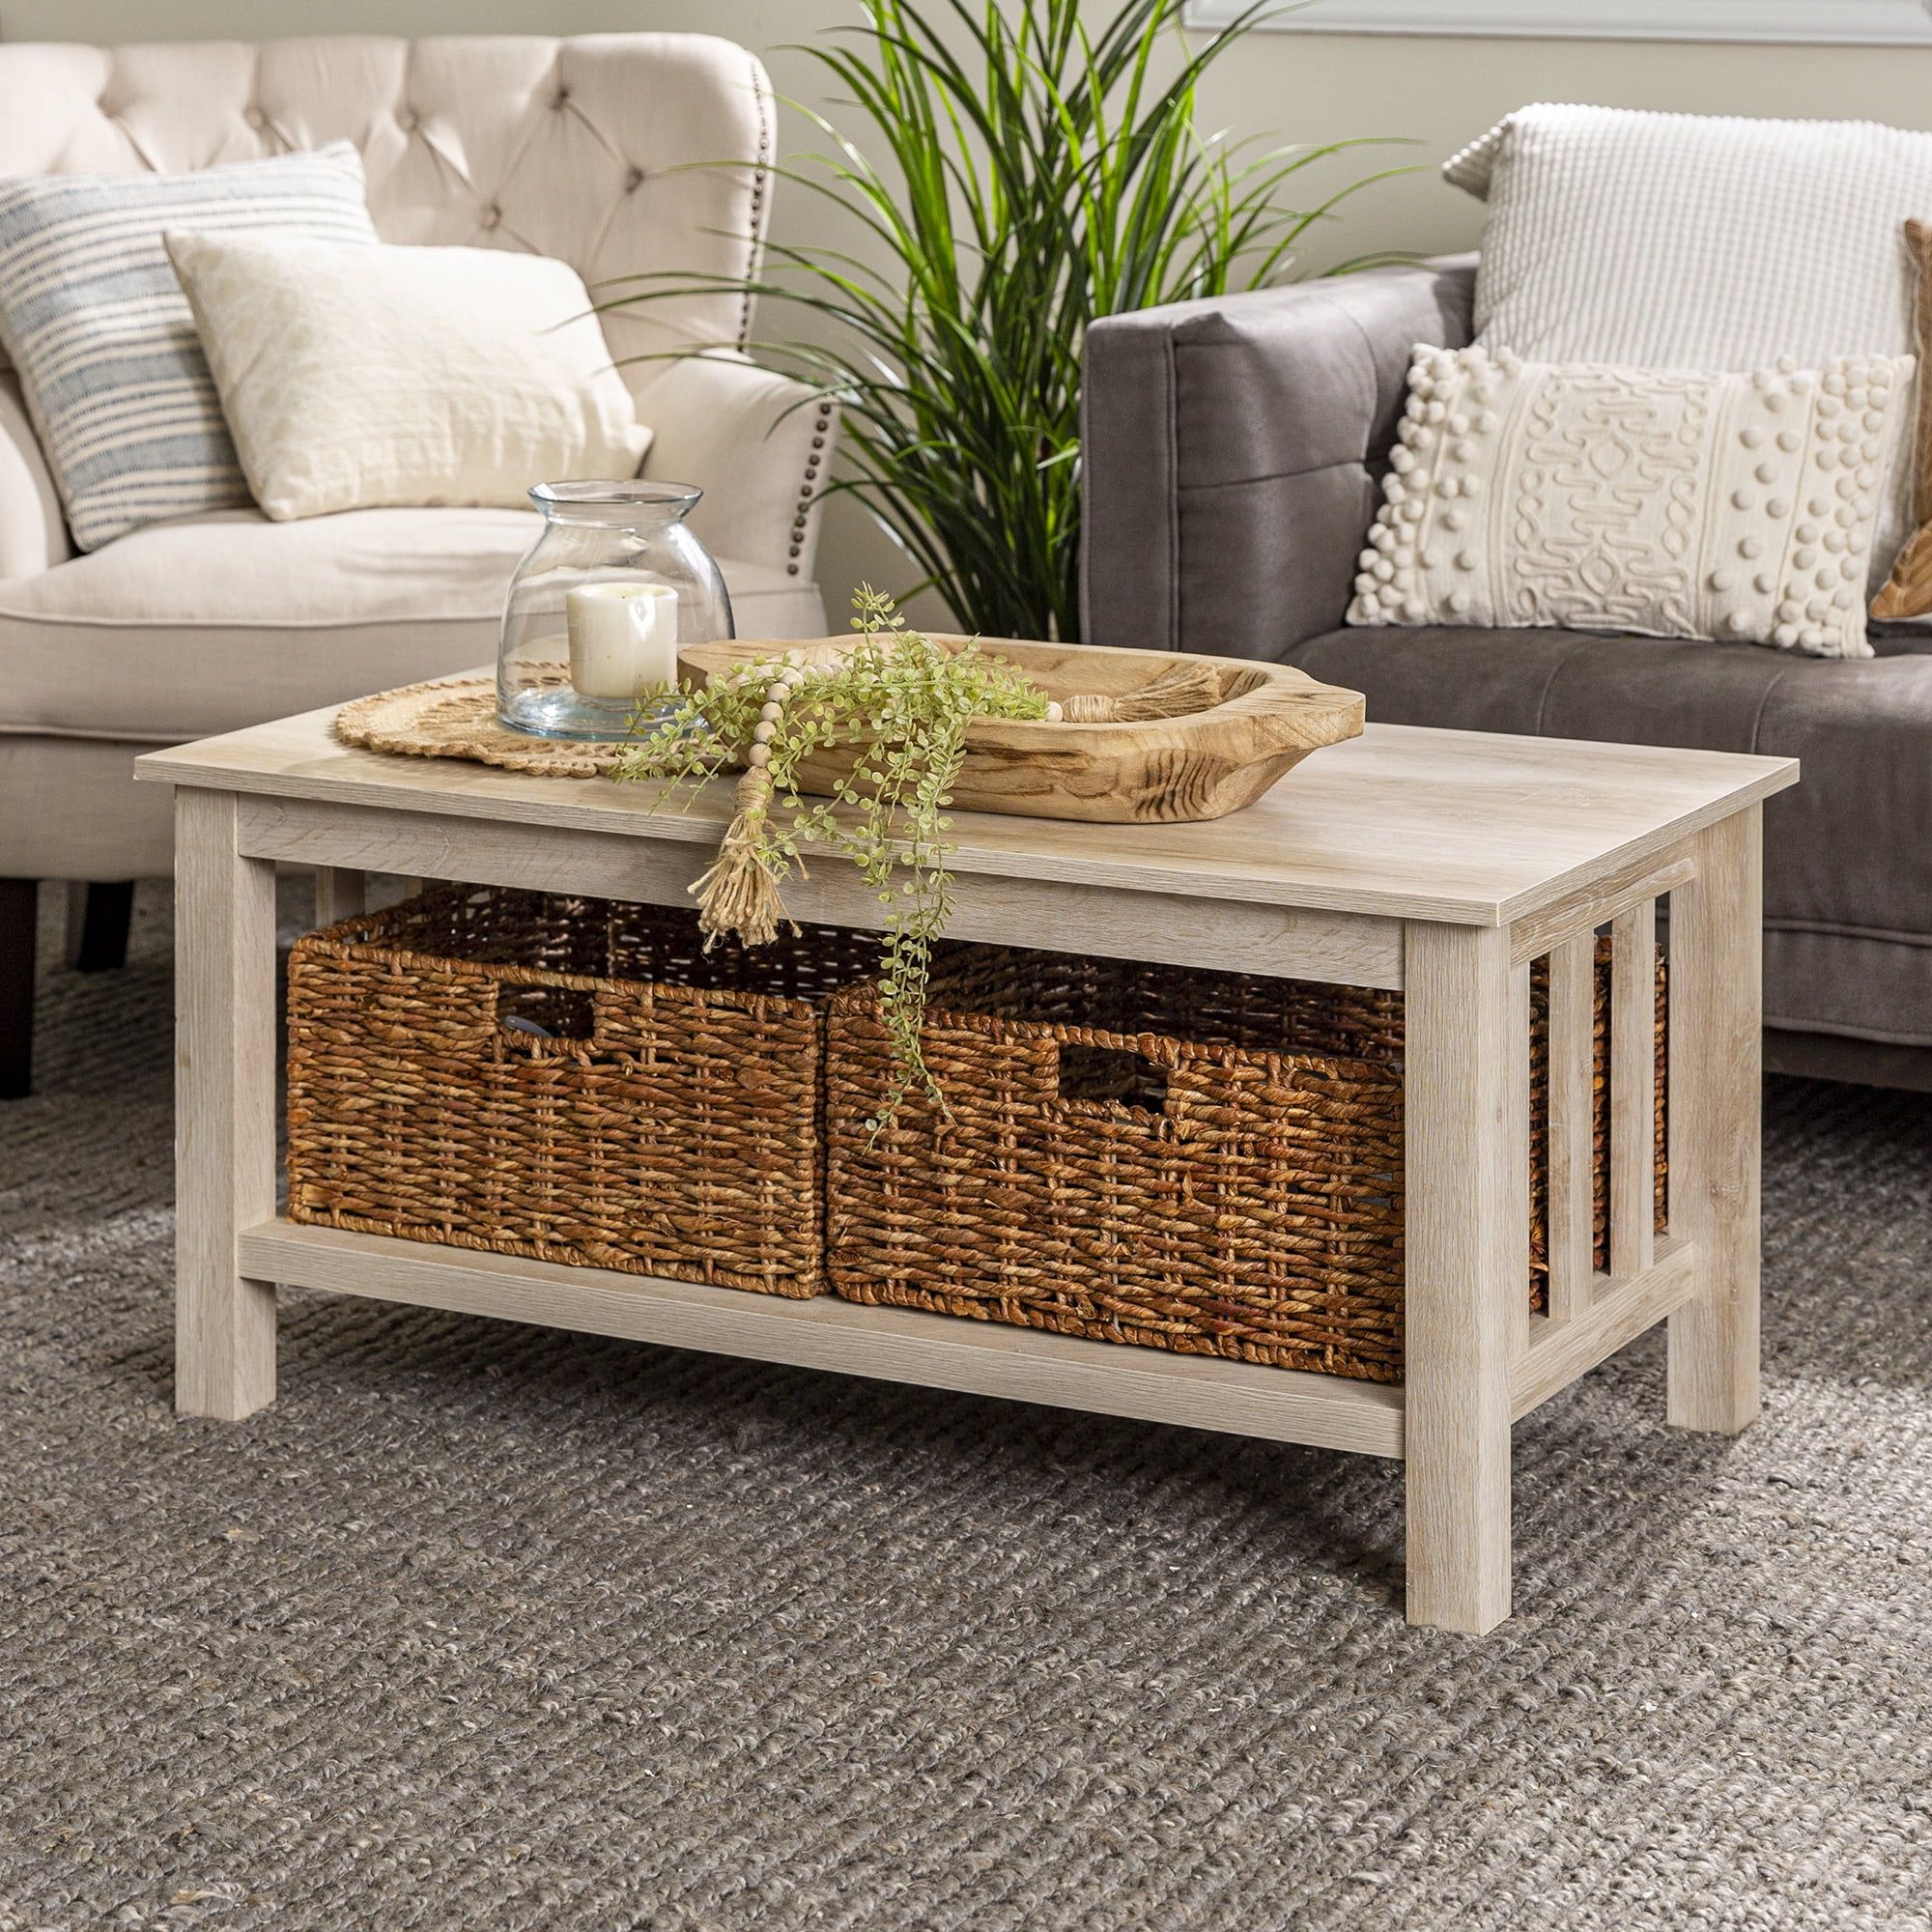 Recent Woven Paths Coffee Tables Pertaining To Woven Paths Traditional Storage Coffee Table With Bins, White Oak (View 2 of 15)